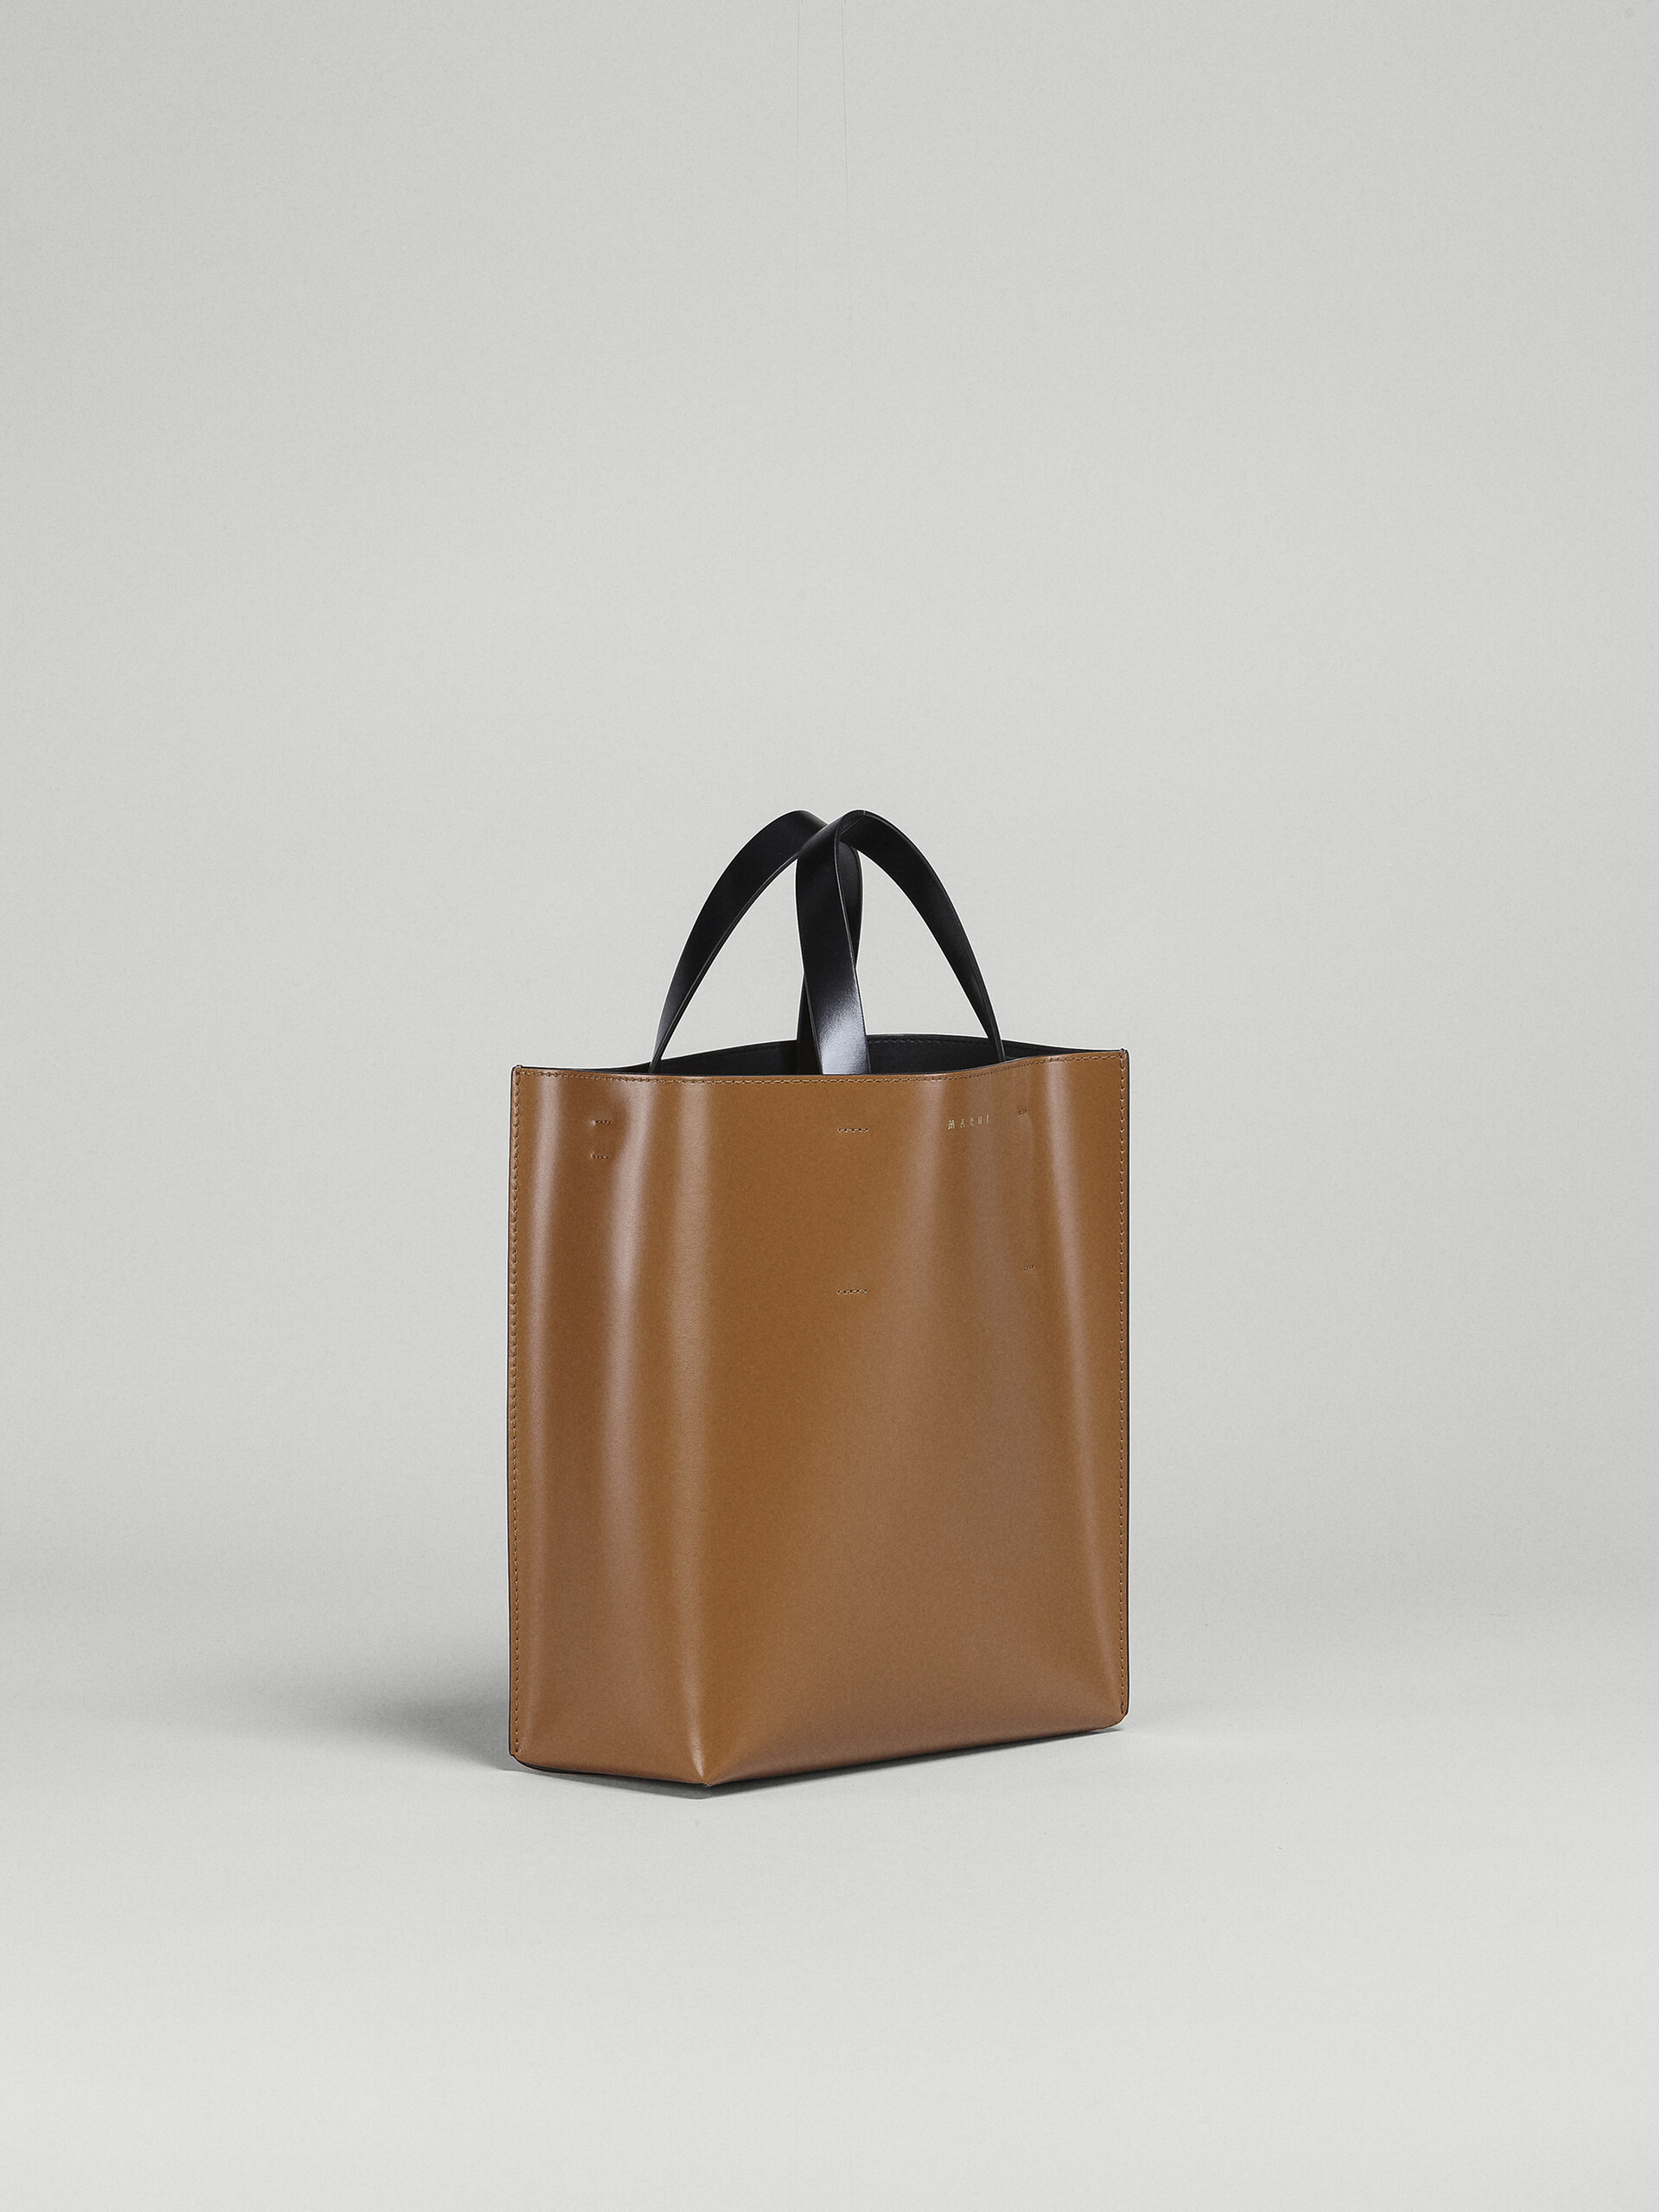 MUSEO small bag in brown and black leather - Shopping Bags - Image 6